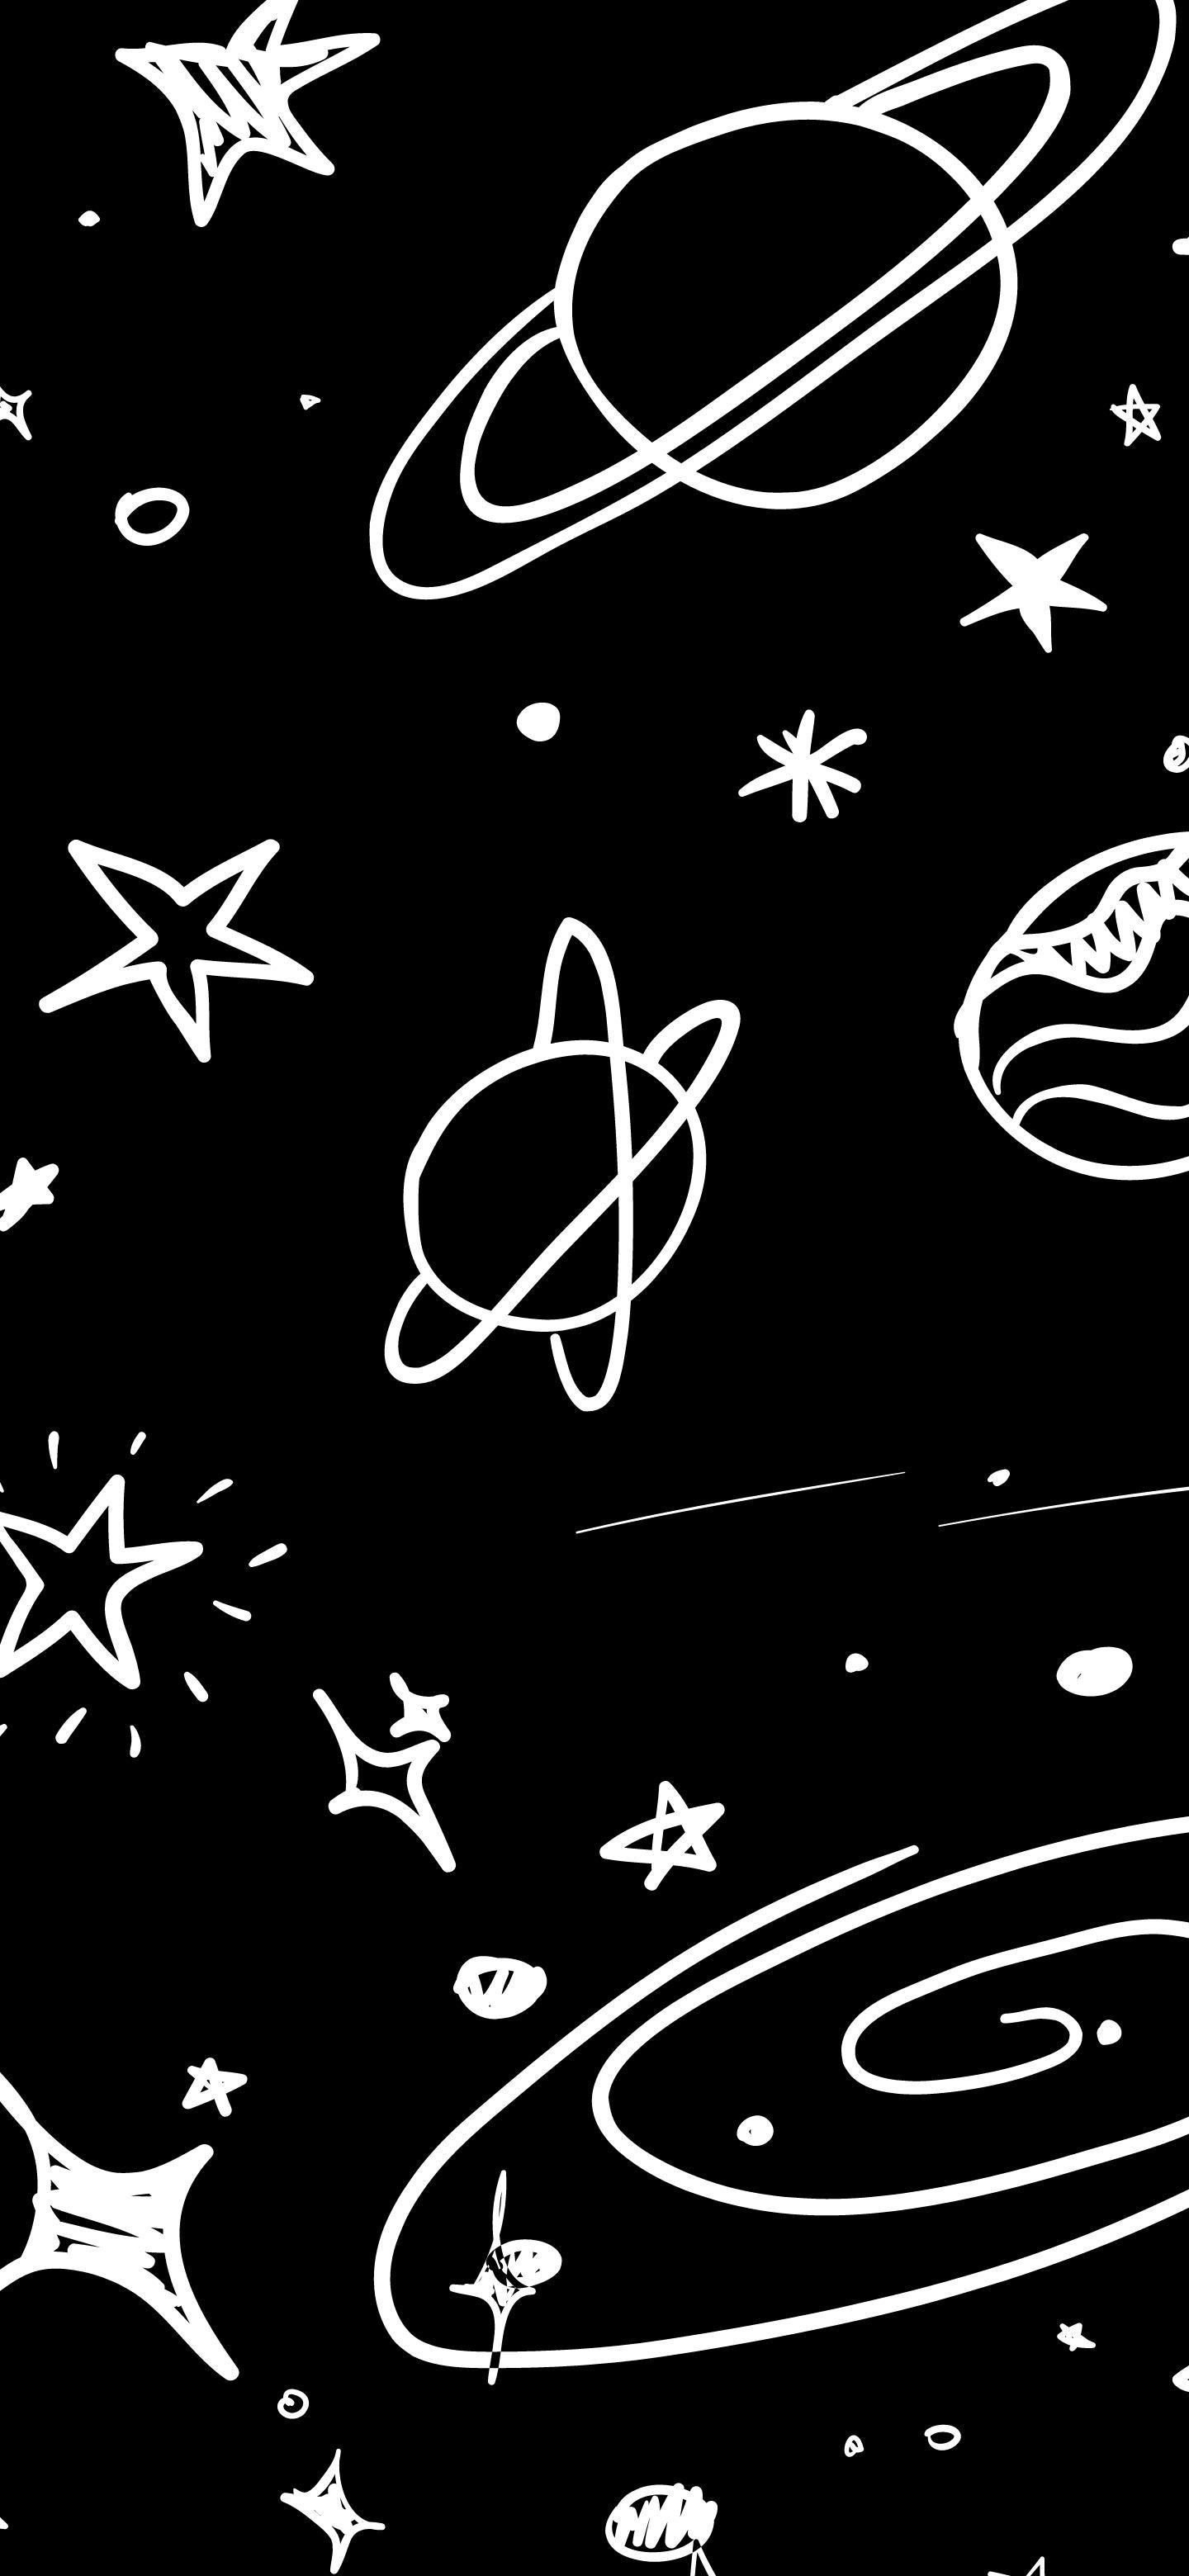 Doodle Space Aesthetic Wallpapers - Top Free Doodle Space Aesthetic ...